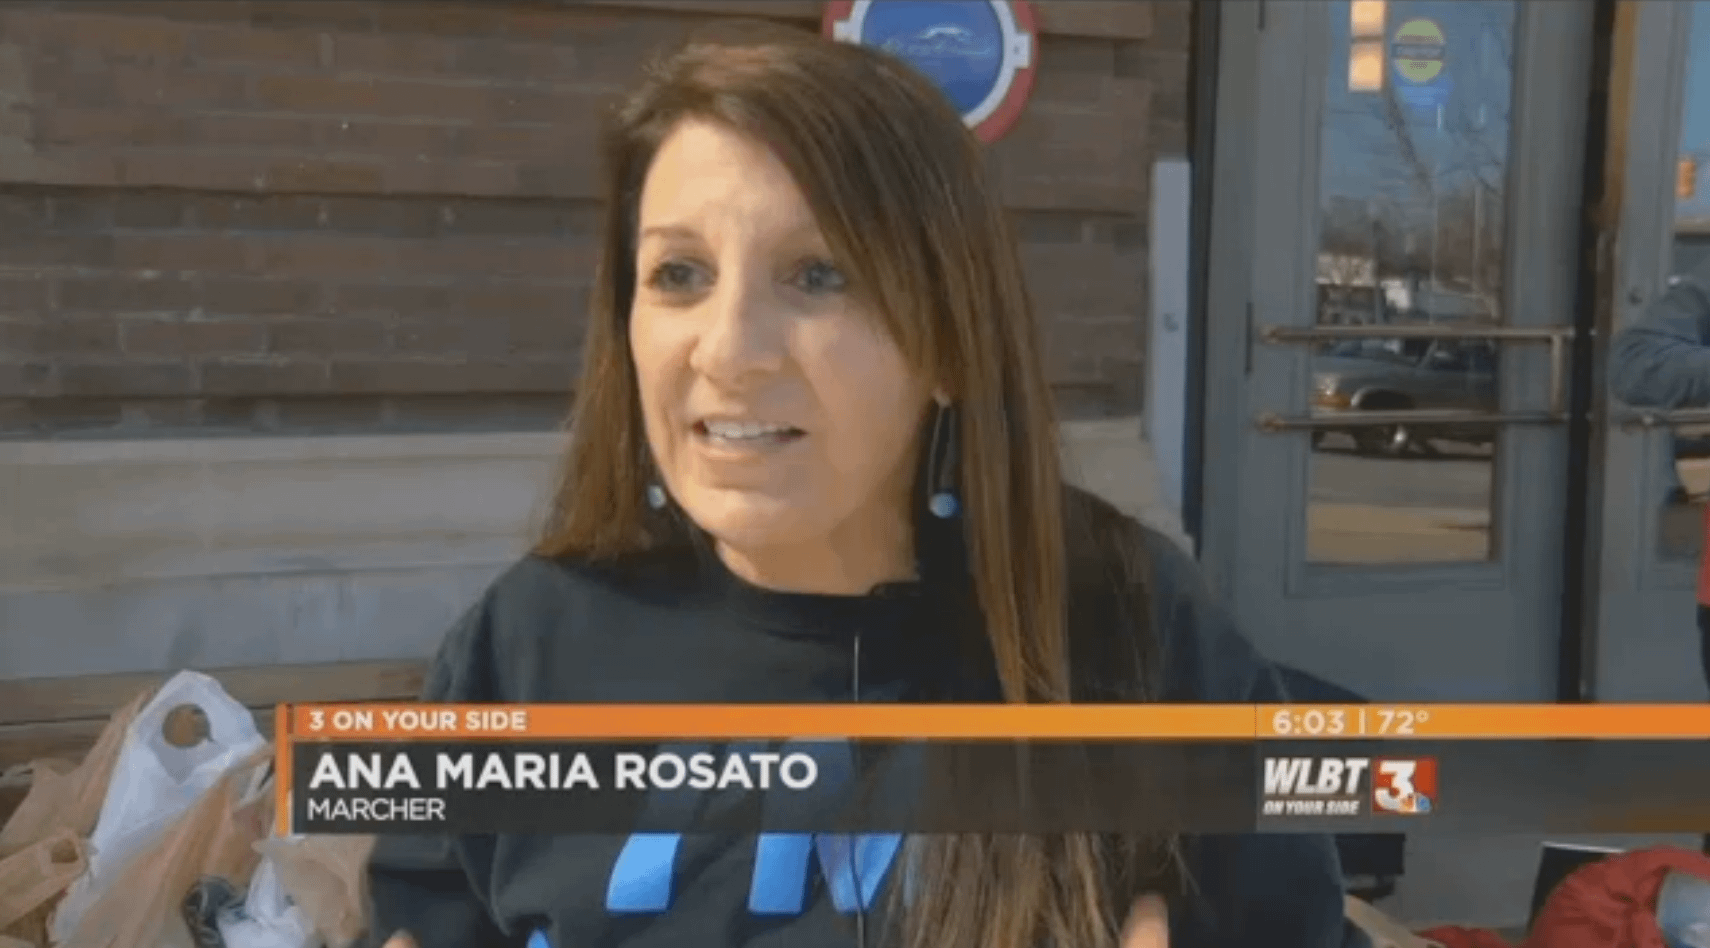 Ana Maria Rosato speaks to WLBT-TV in Jackson, Mississippi before hopping on the bus to travel to the Women's March on Washington held January 21, 2017